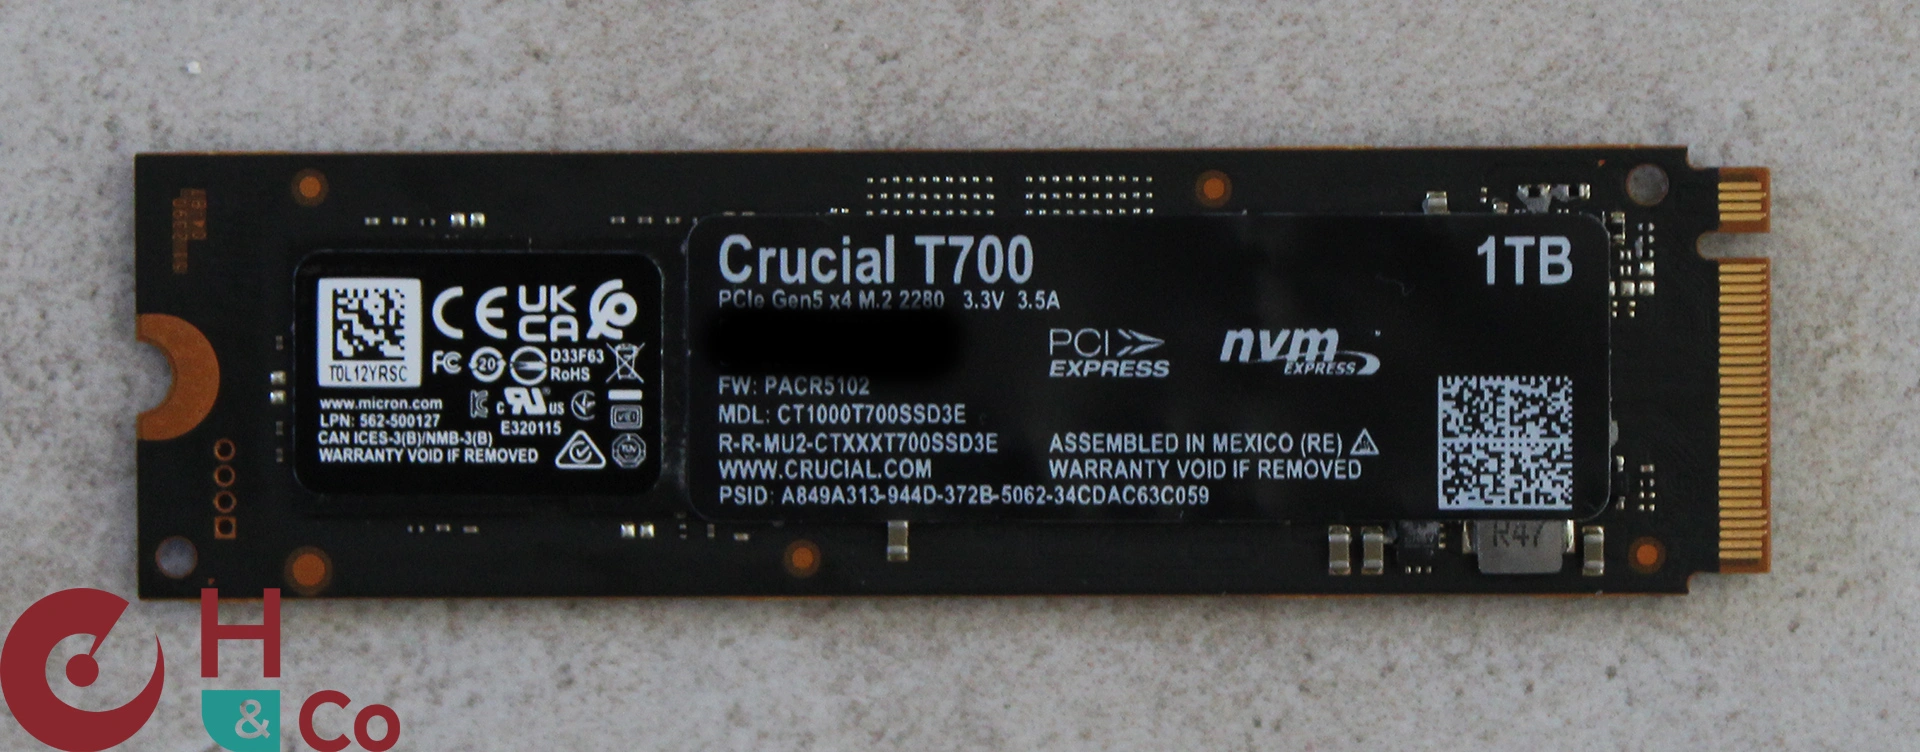 Crucial T700 Verso